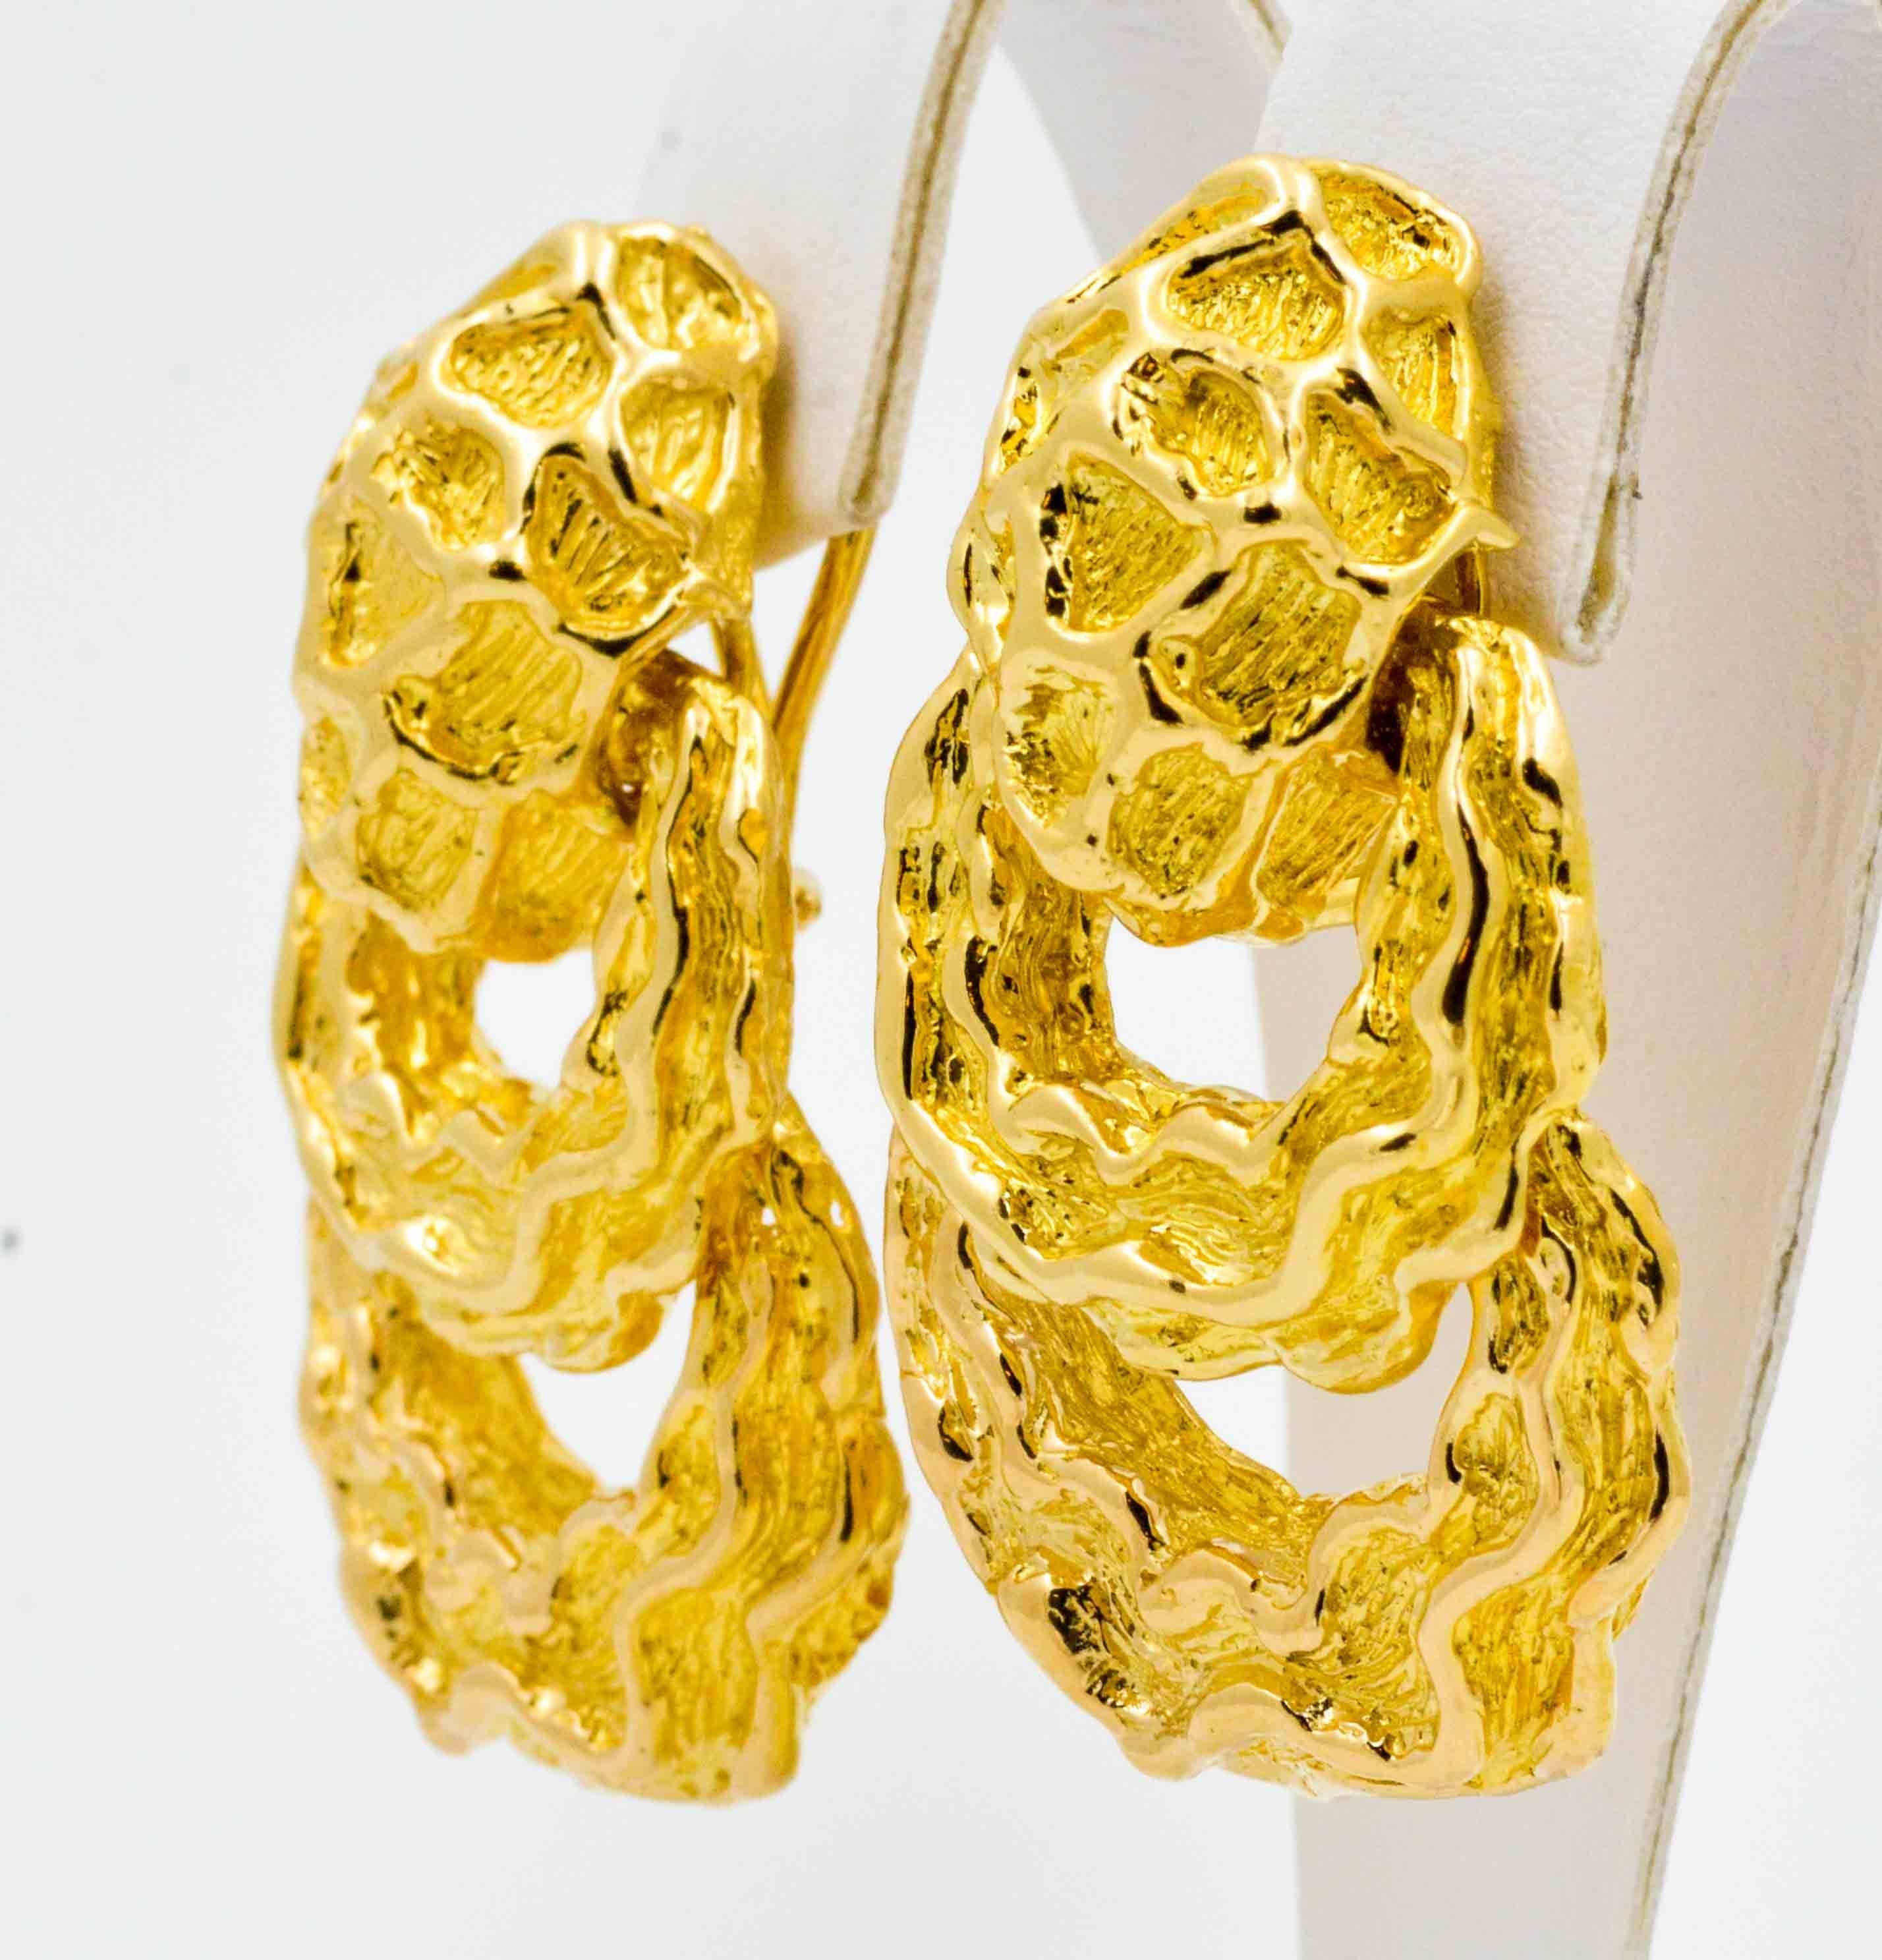 This adventurous pair of door knocker style earrings is crafted in bold 18kt yellow gold.  The door knocker earrings have a random pattern of free form texture that contrasts between a rough finish and a bright high polished finish.  The knocker